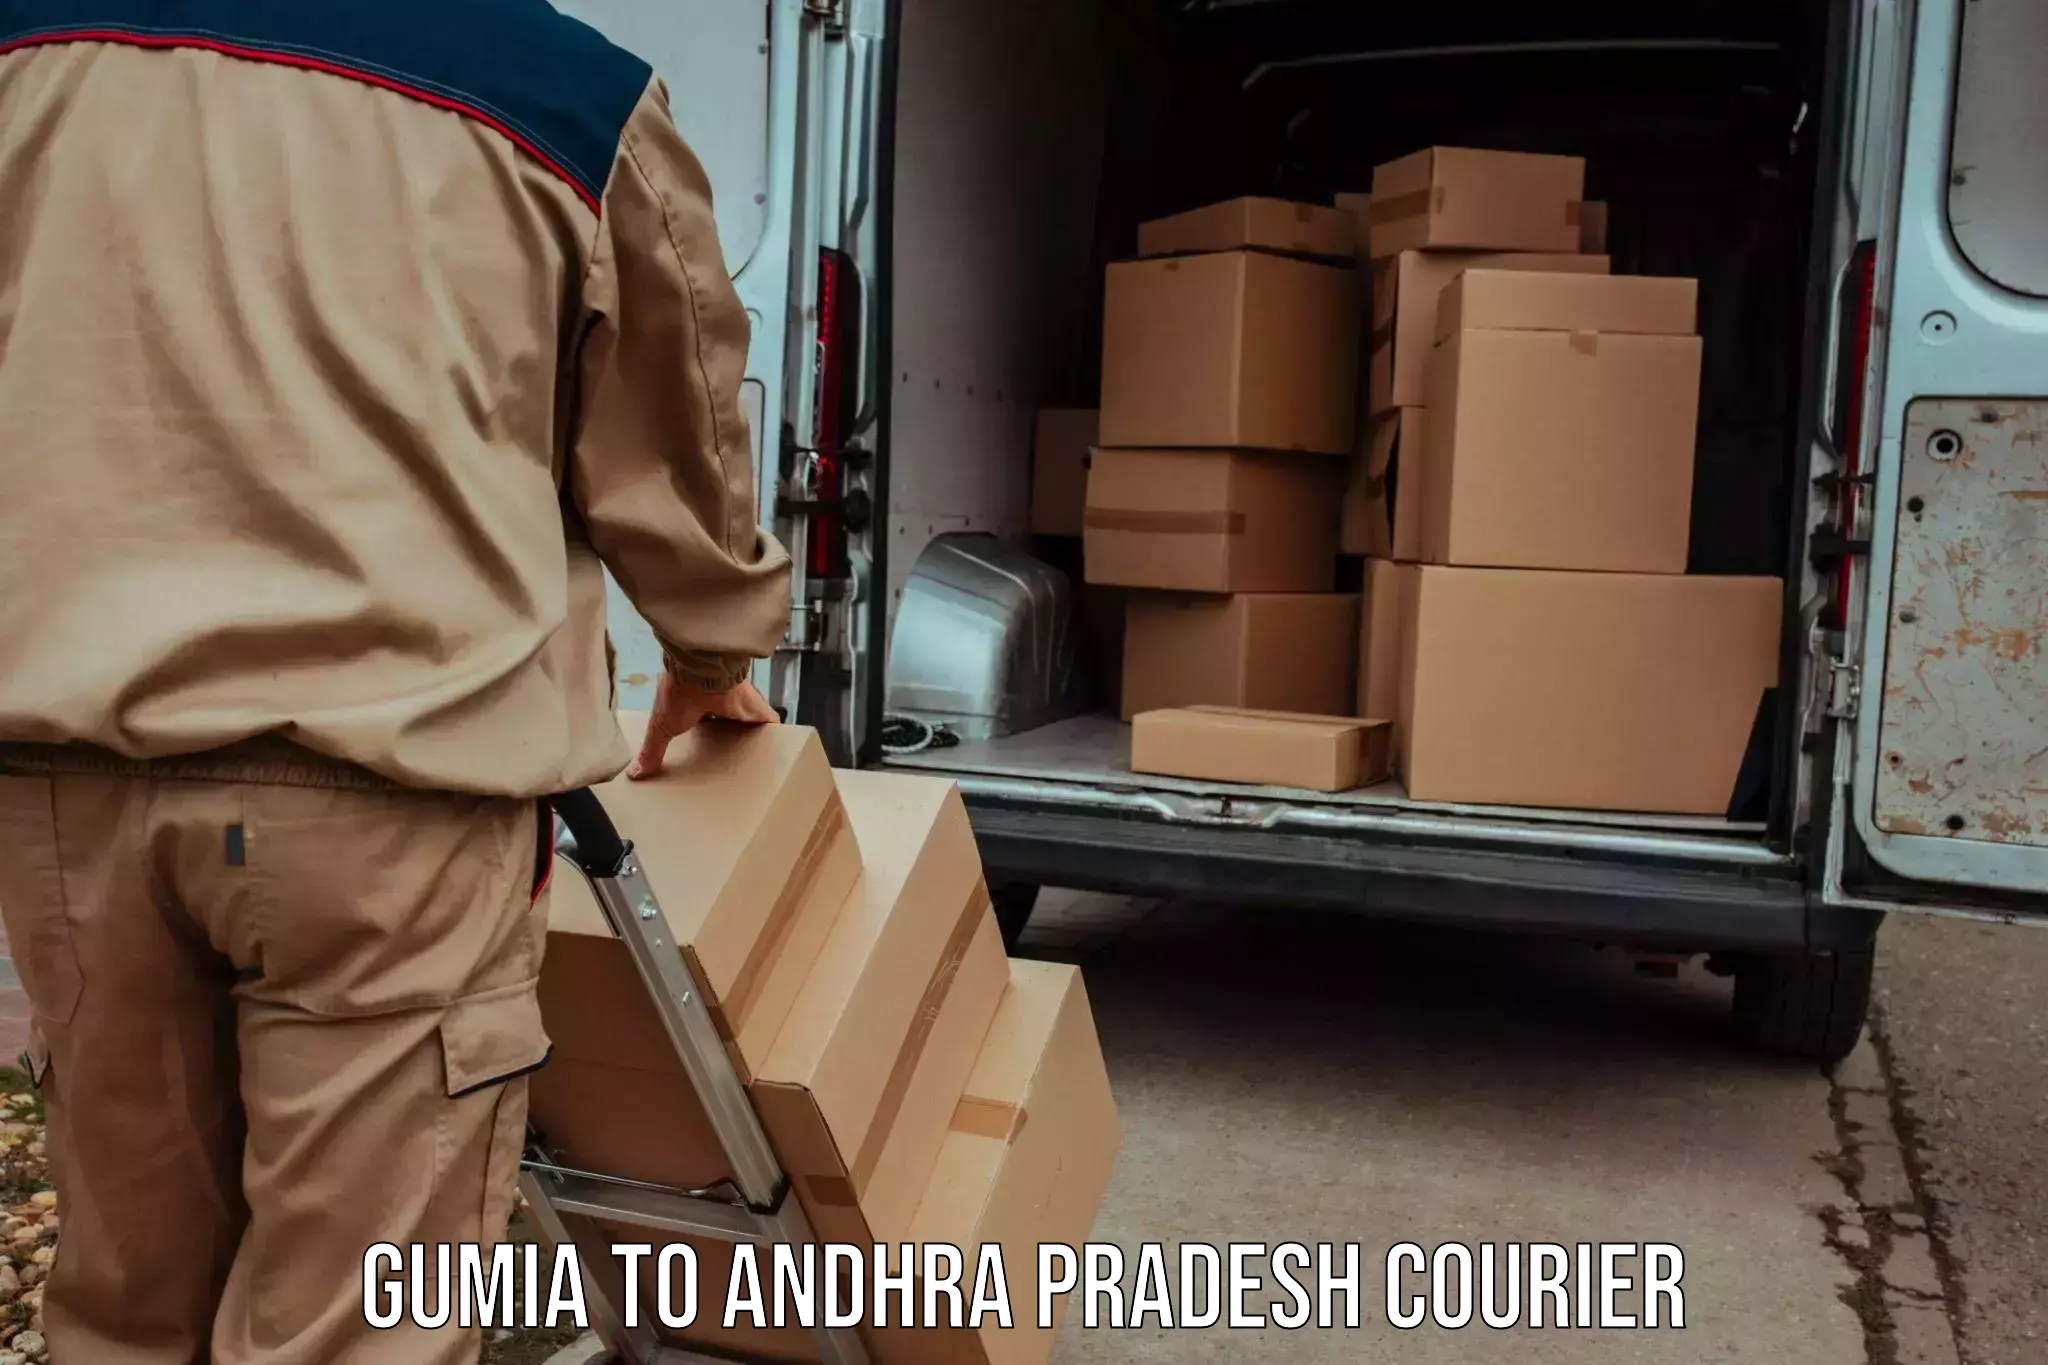 Express package services Gumia to East Godavari